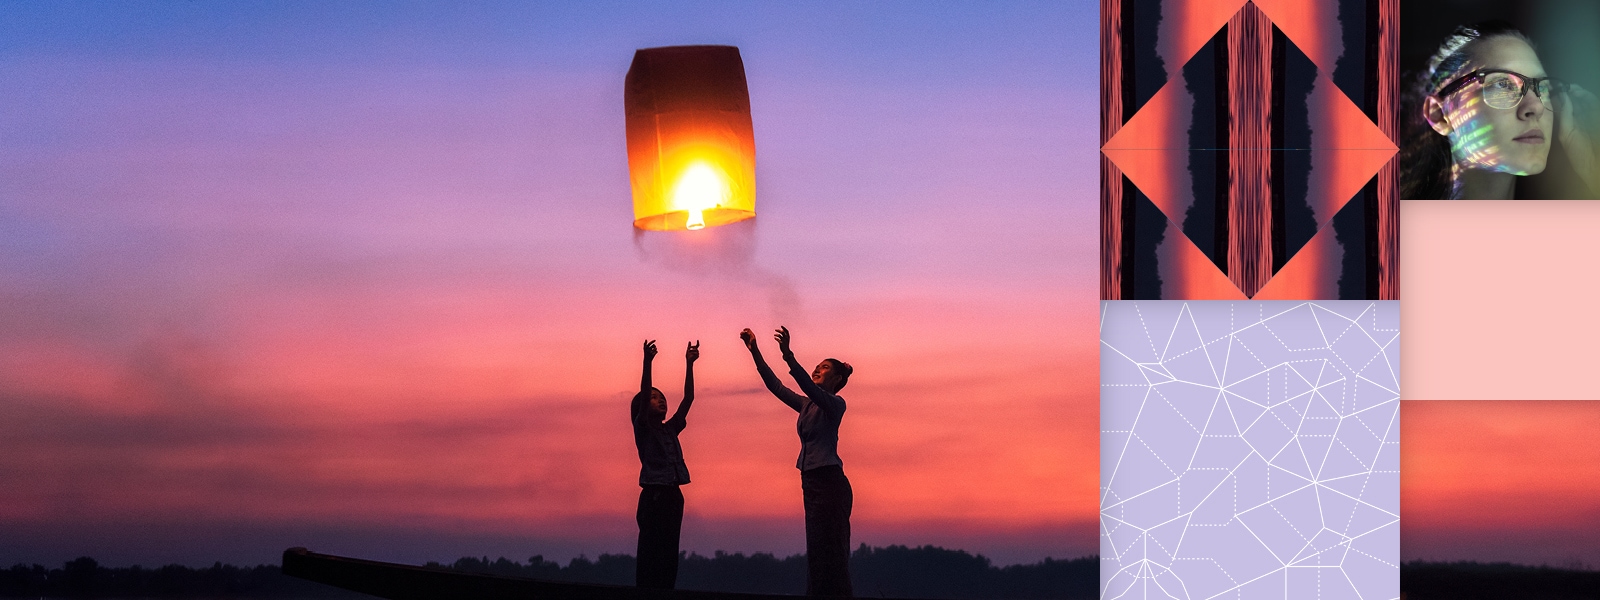 Silhouette of a family releasing illuminated lanterns while standing in the sea at dusk, with an abstract overlay.